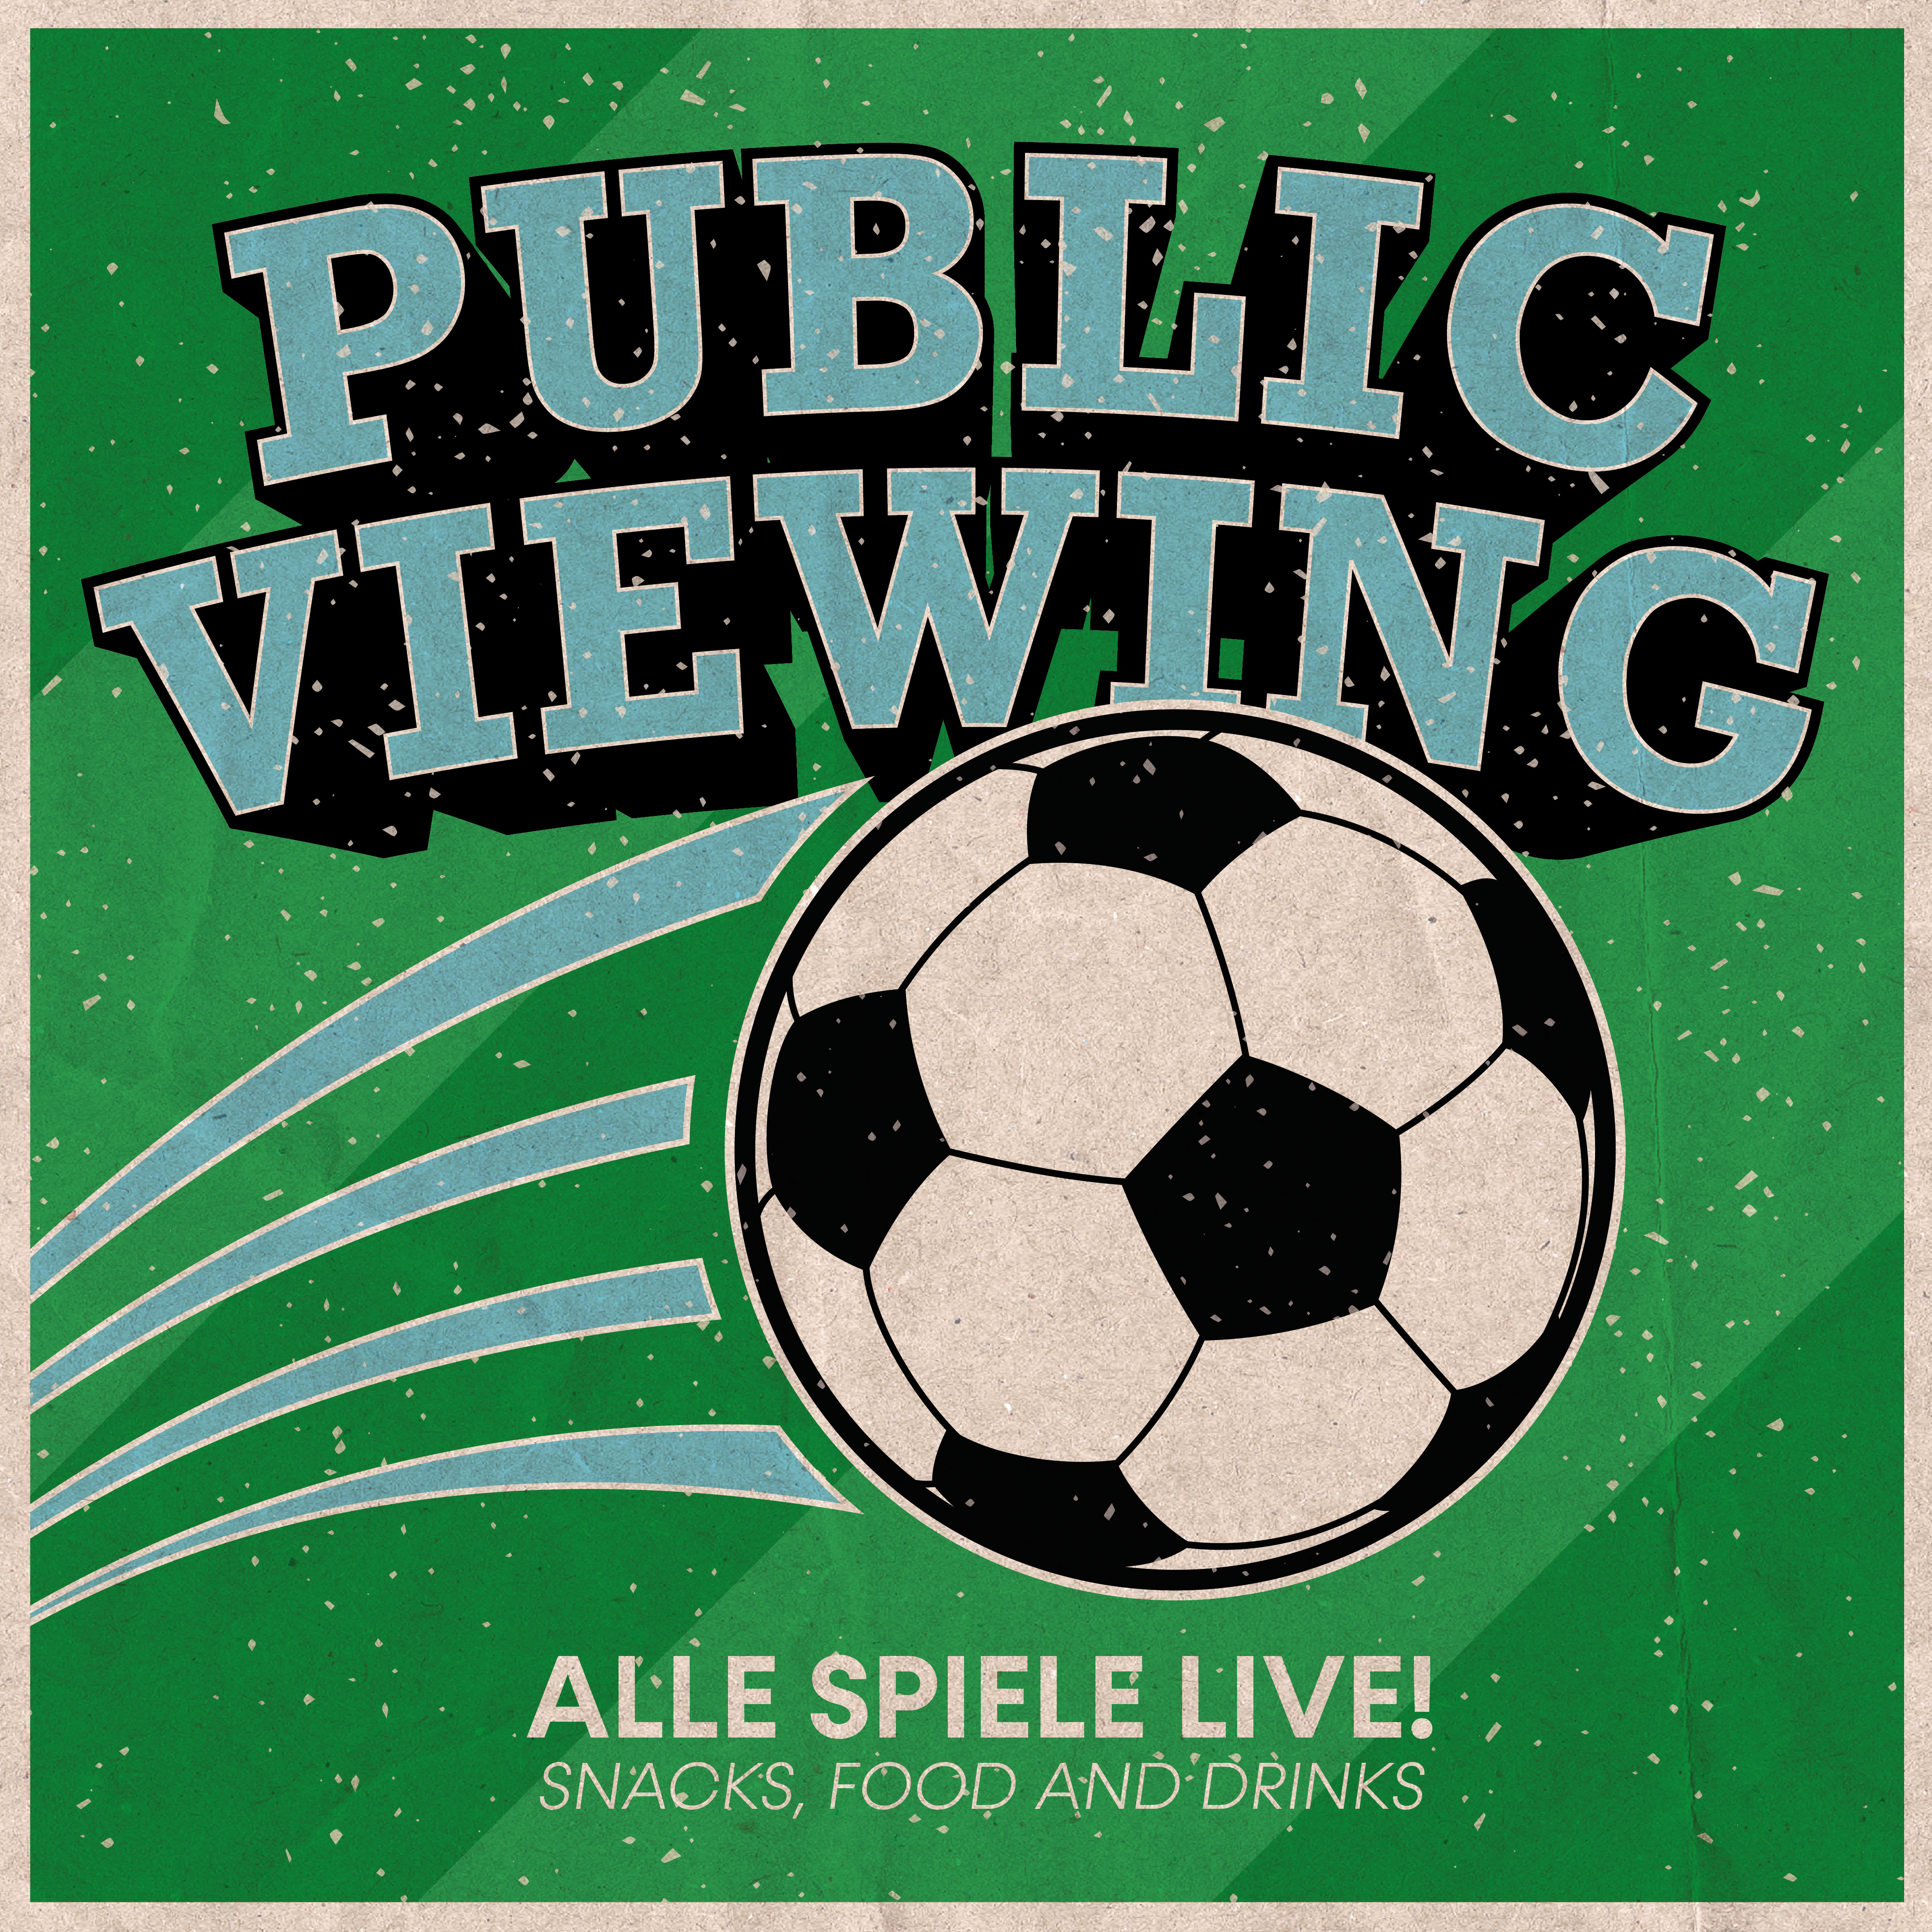 Public Viewing - 27.06.2021 BaselLive